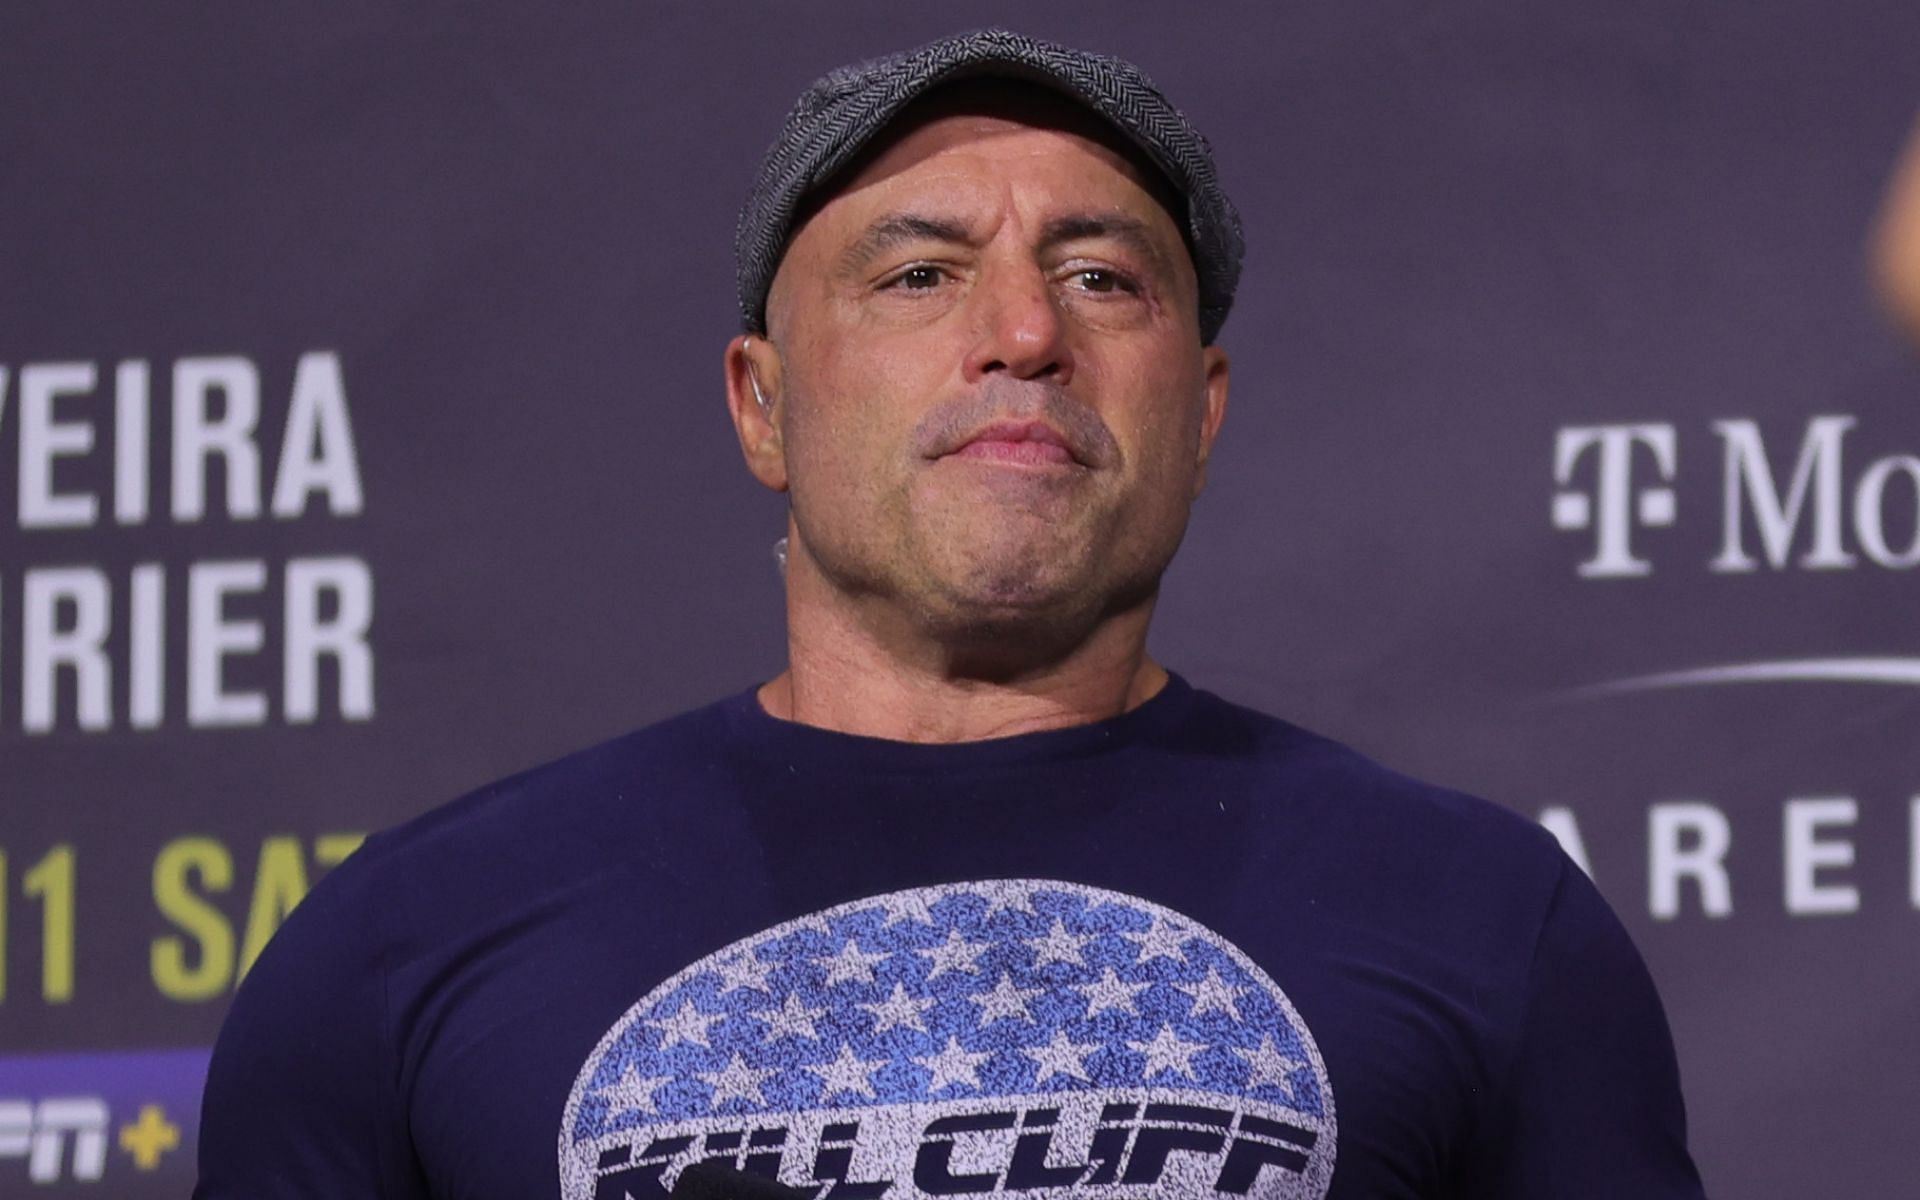 Stand-up comedian and UFC commentator Joe Rogan at the UFC 269 official weigh-in ceremony last month